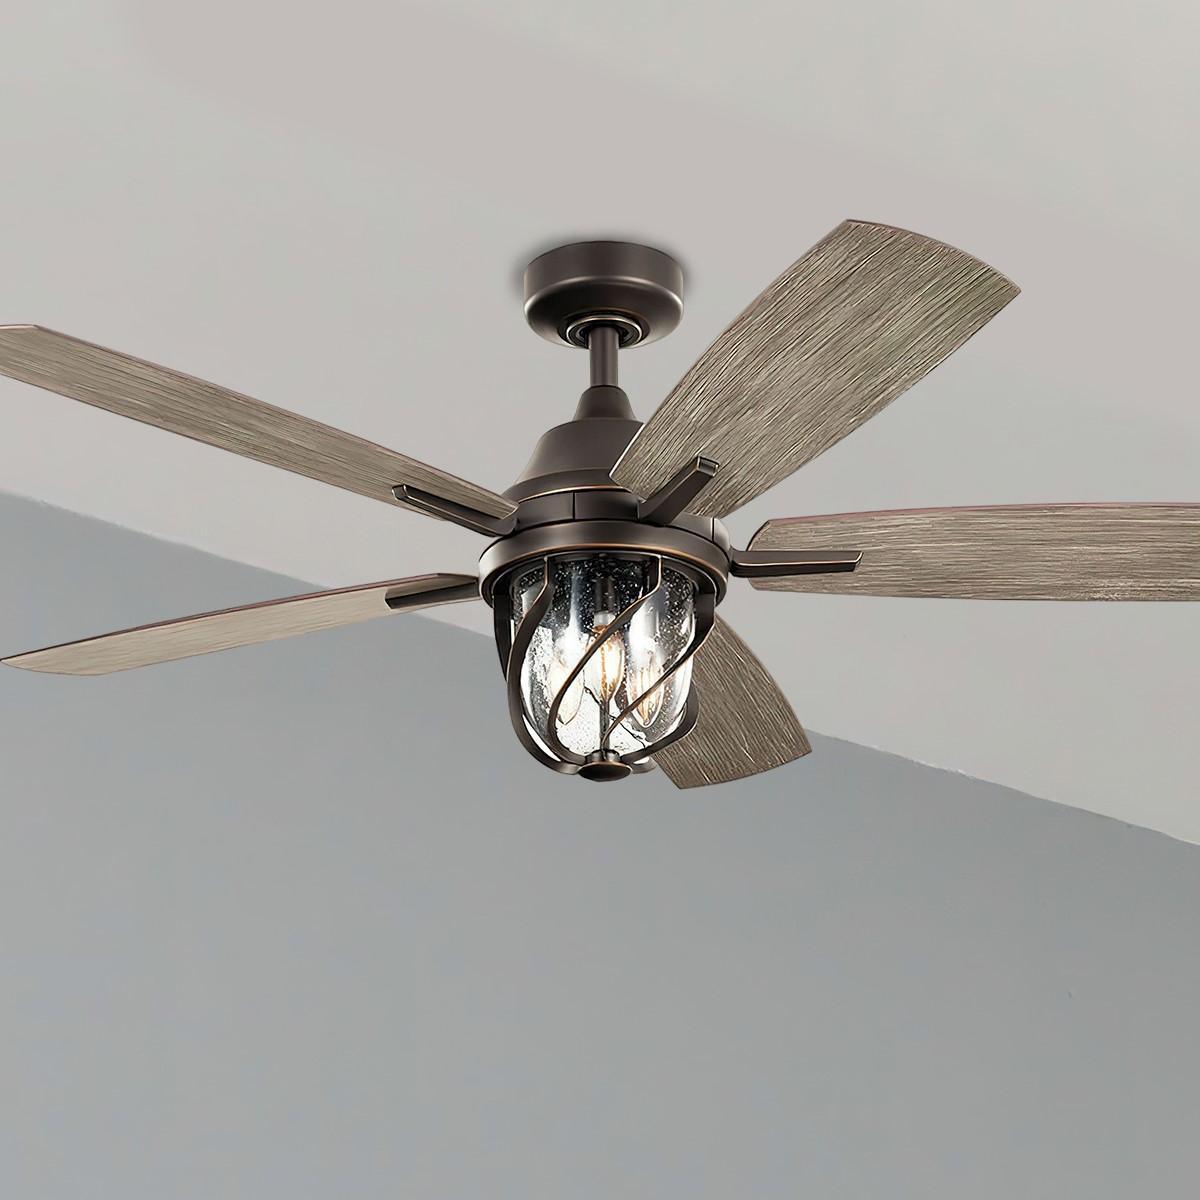 Lydra 52 Inch Rustic Caged Indoor/Outdoor Ceiling Fan With Light And Remote - Bees Lighting